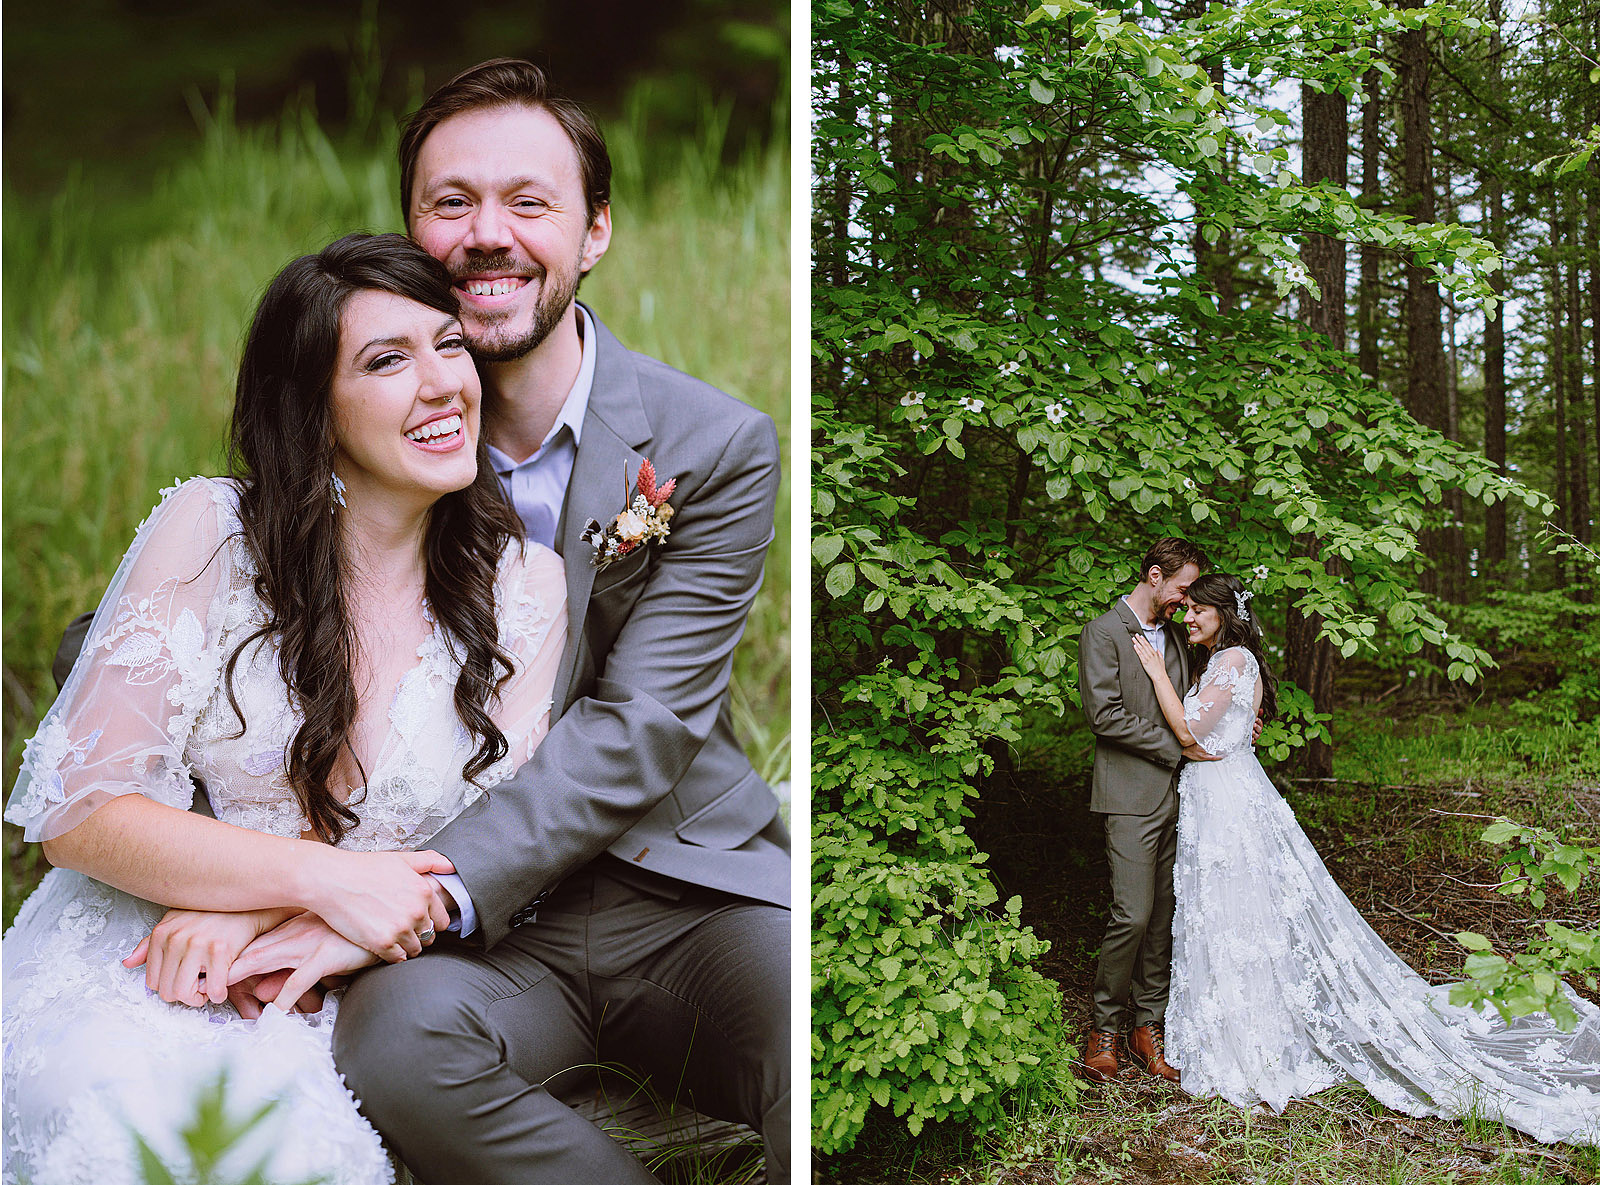 Portraits of bride and groom cuddling in the forest - Trout Lake Wedding, WA